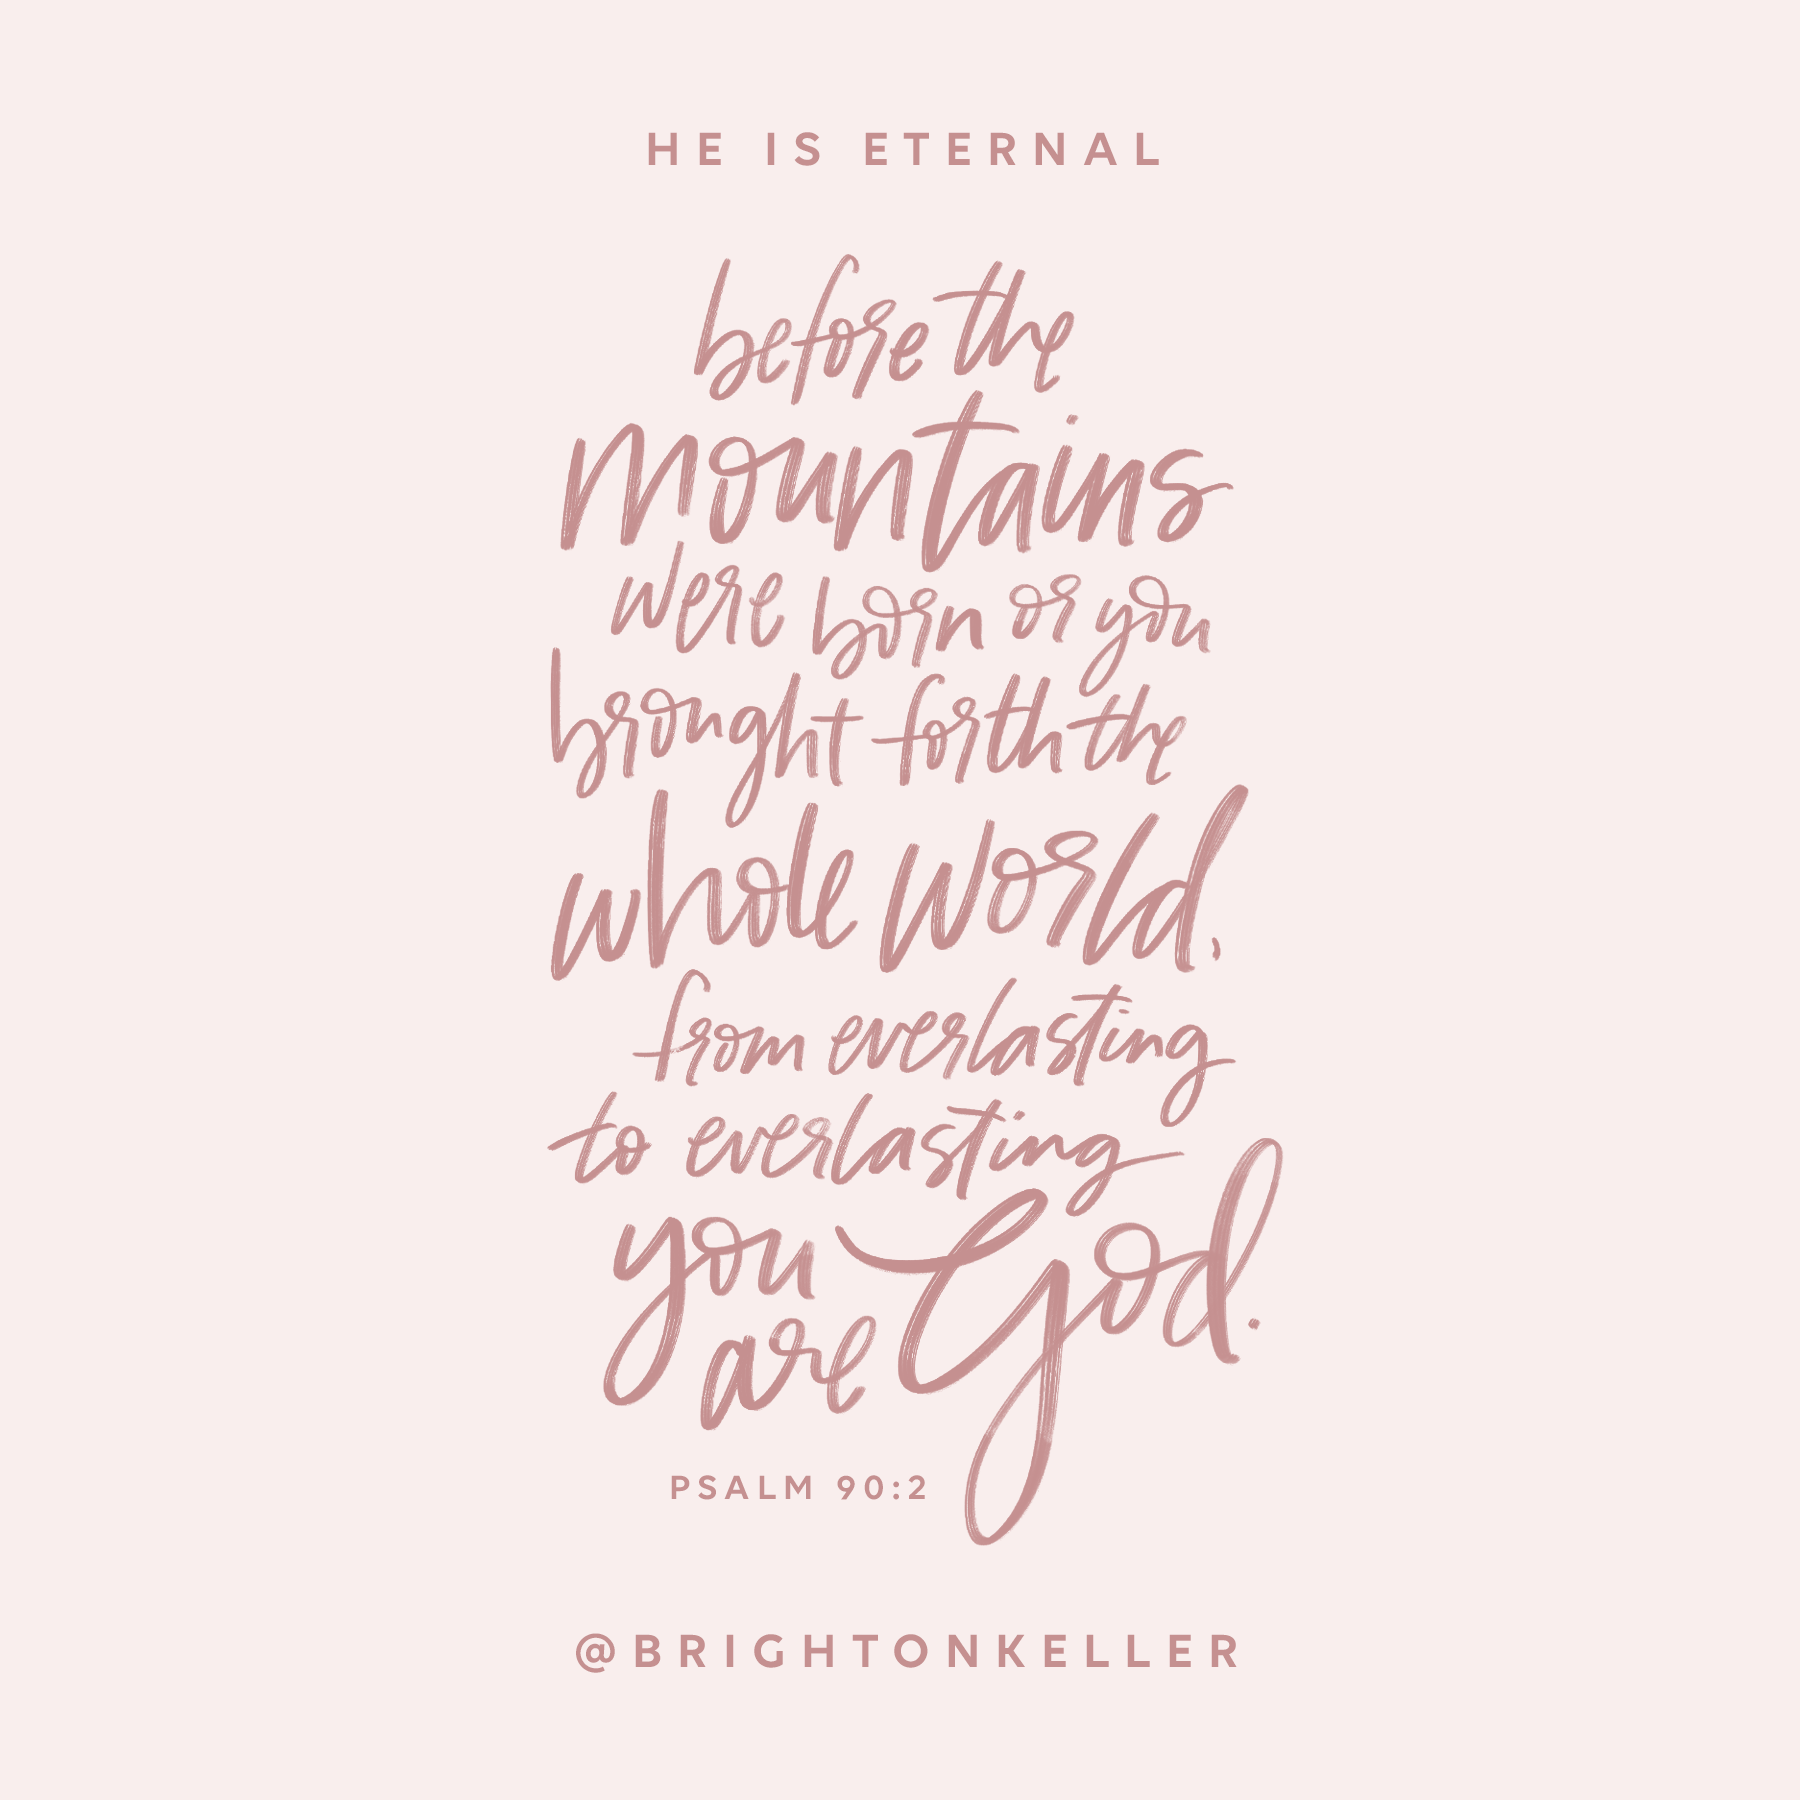 god is eternal attributes of God series psalm 90:2